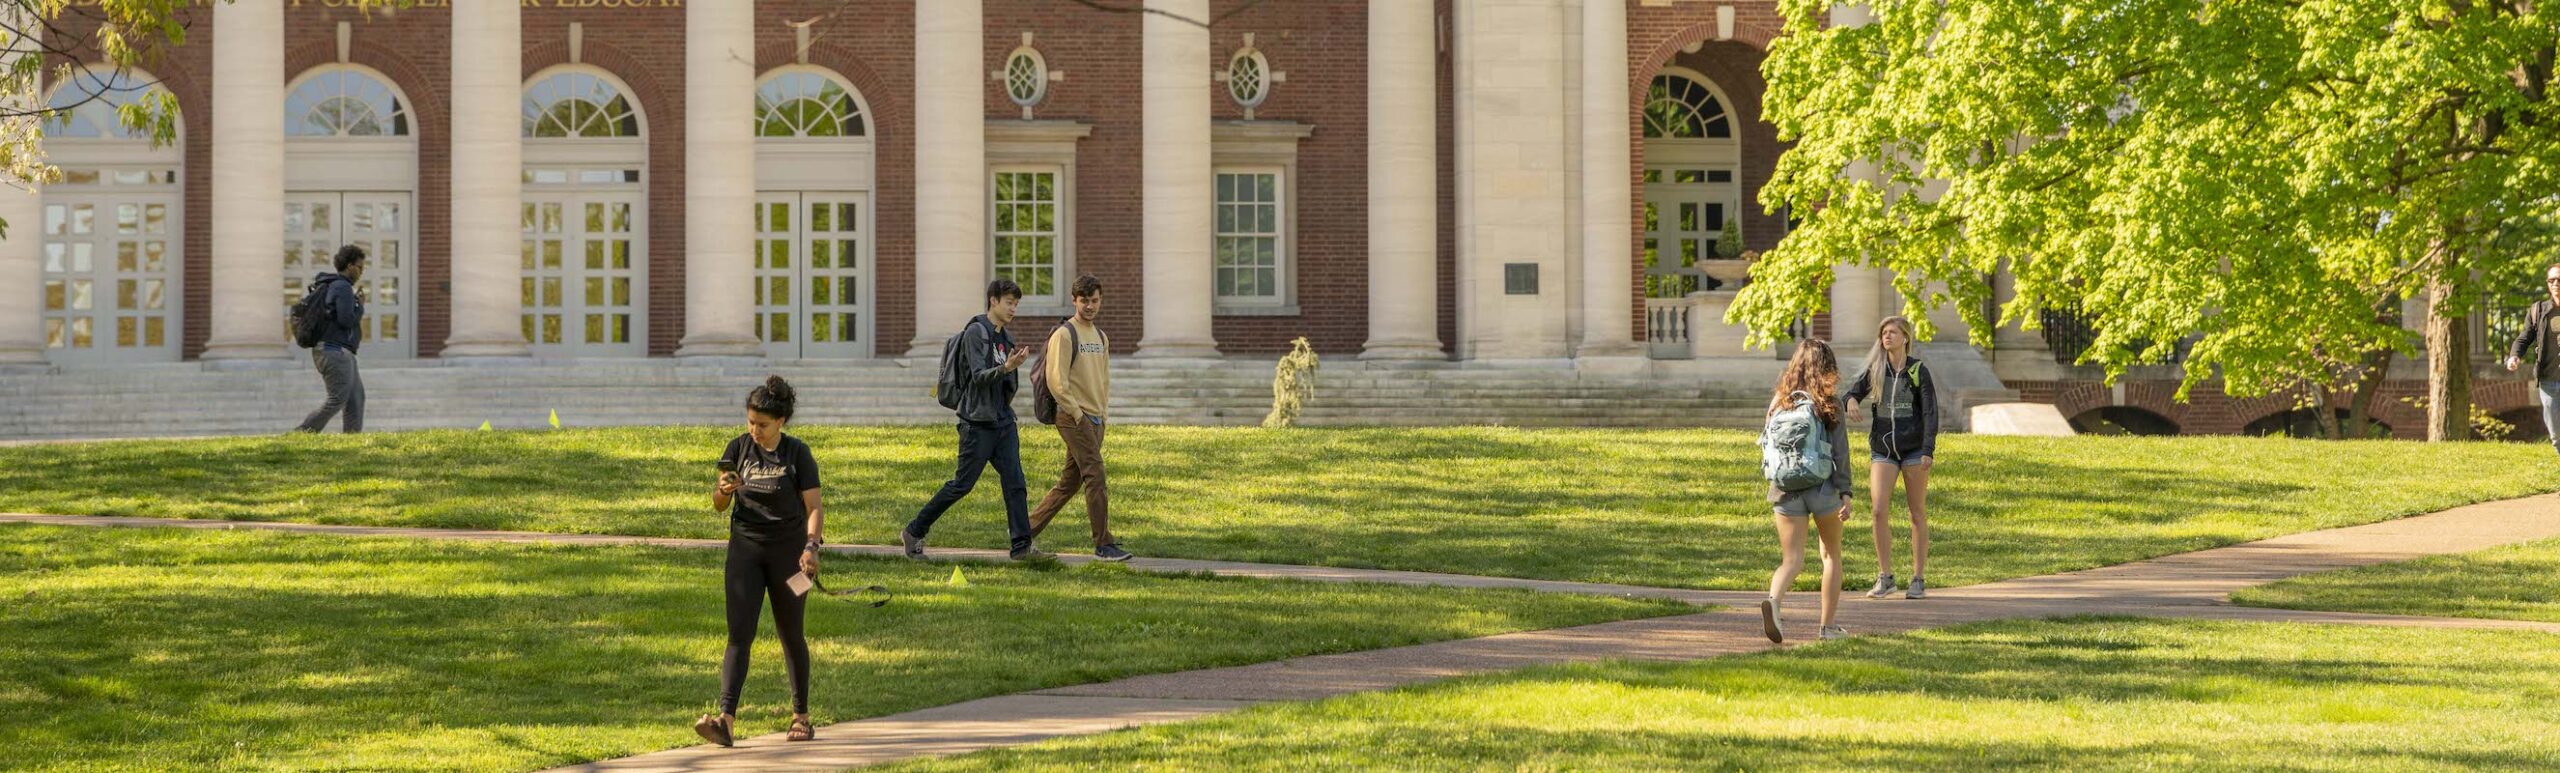 students walking around campus on sunny day